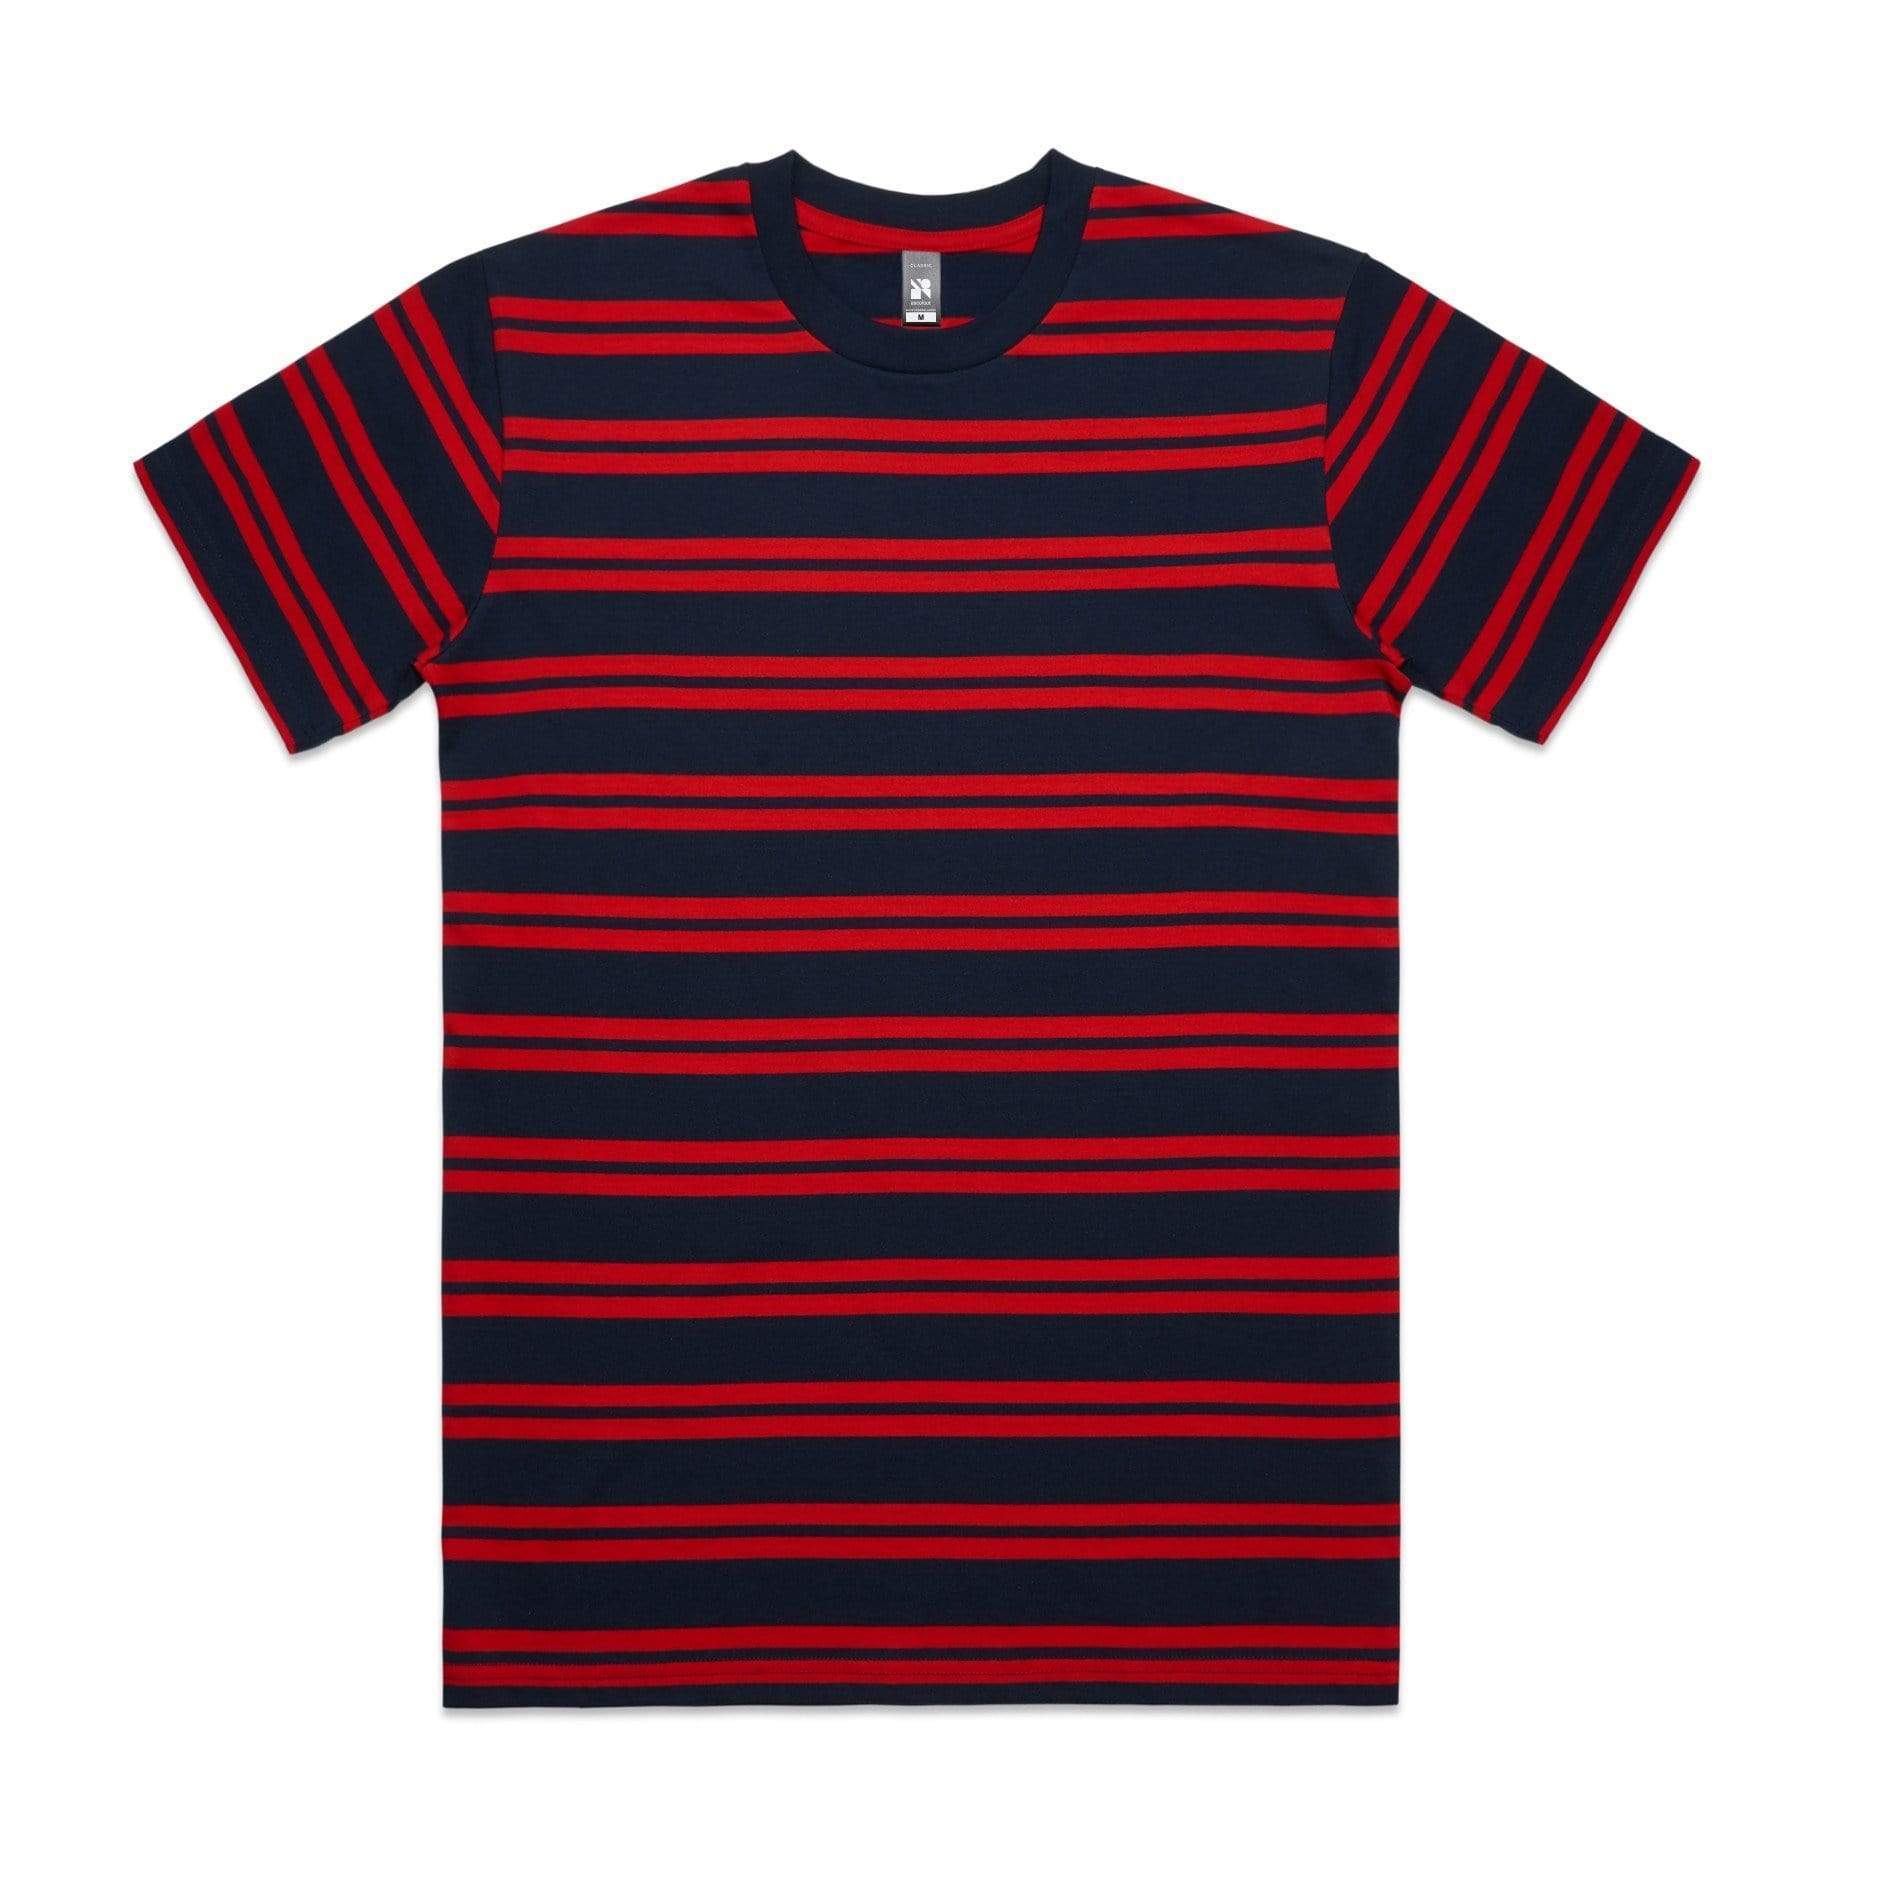 As Colour Men's classic stripe tee 5044 Casual Wear As Colour NAVY/RED XSM 